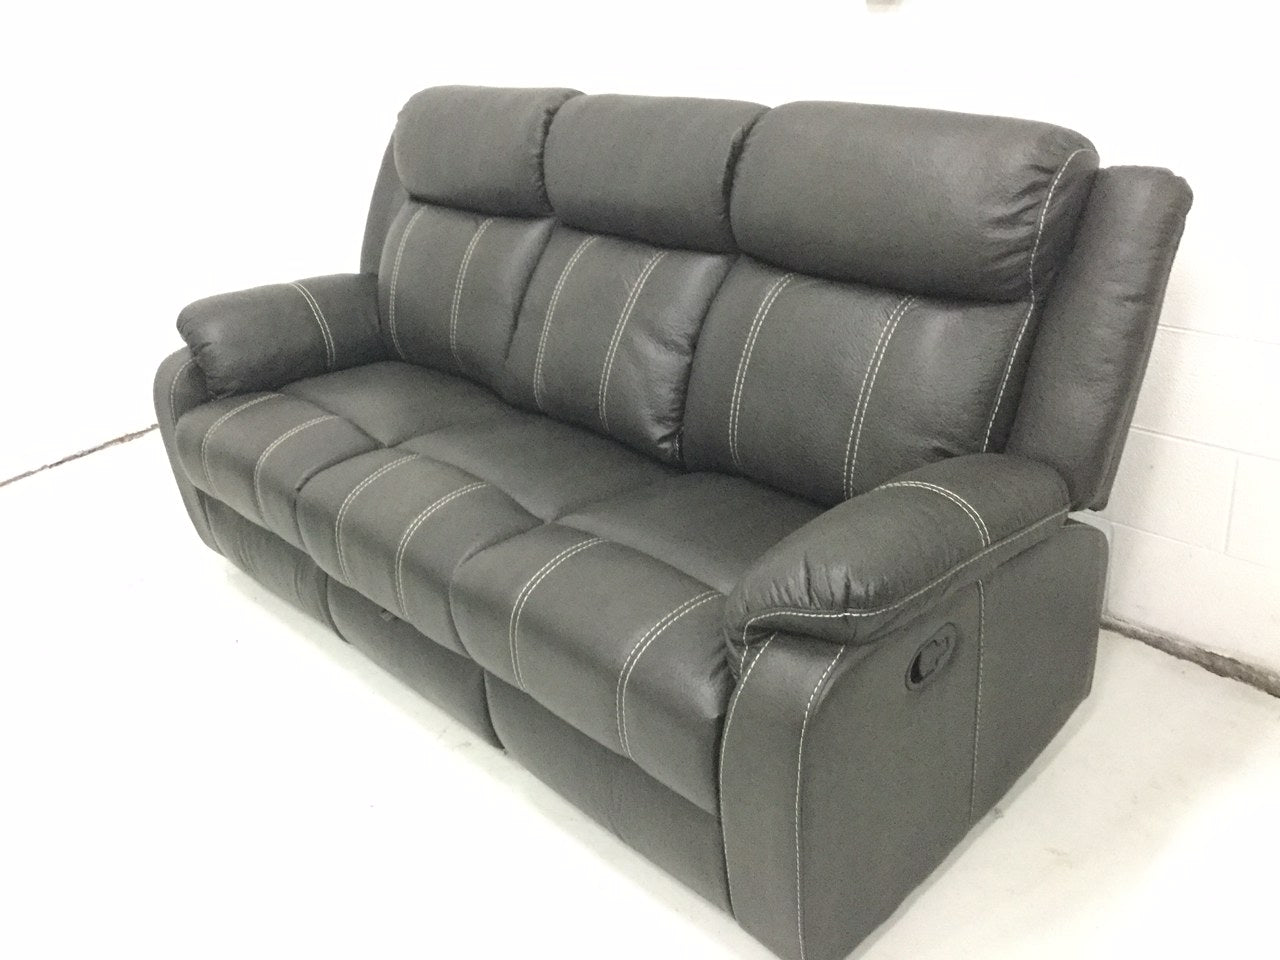 WEEKLY or MONTHLY. Fully Modular Charcoal Comfort Reclining Sectional